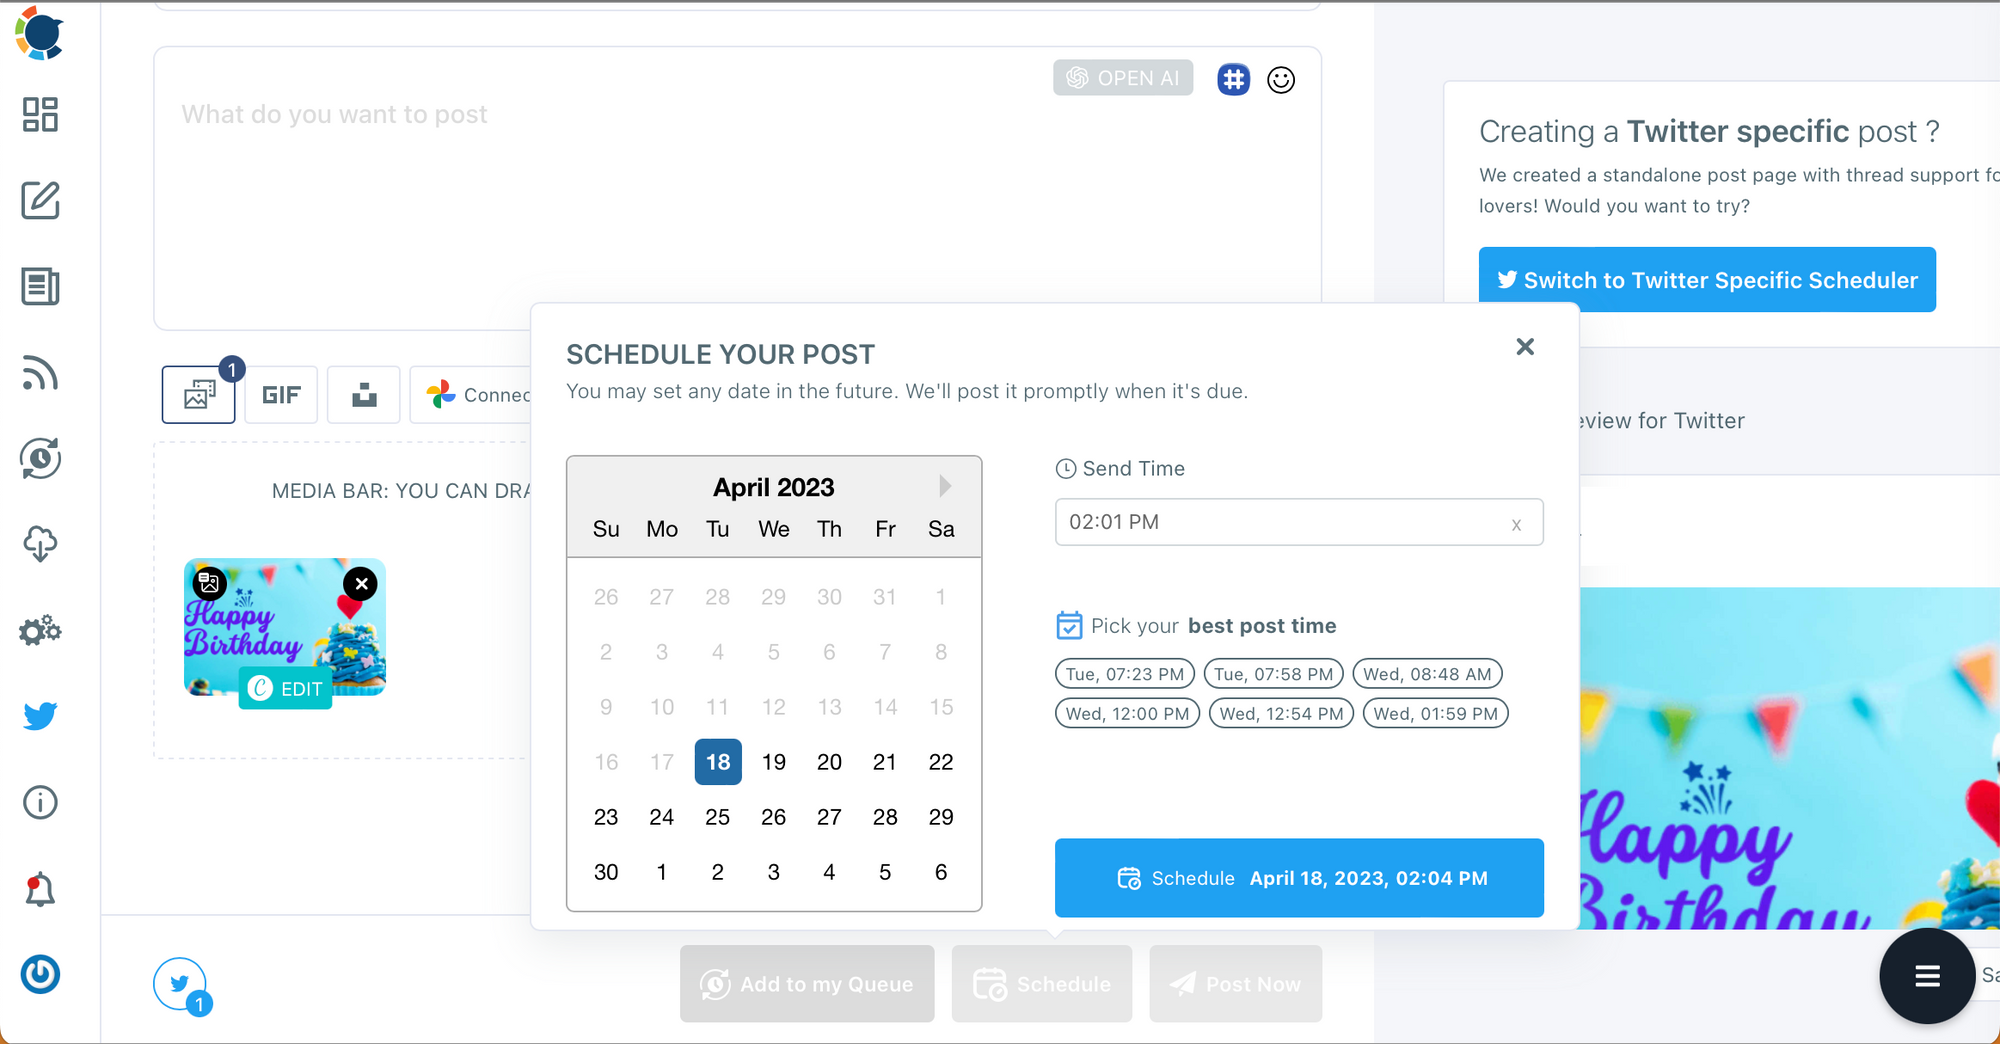 Schedule and automate your posts for multiple Facebook Groups at once!